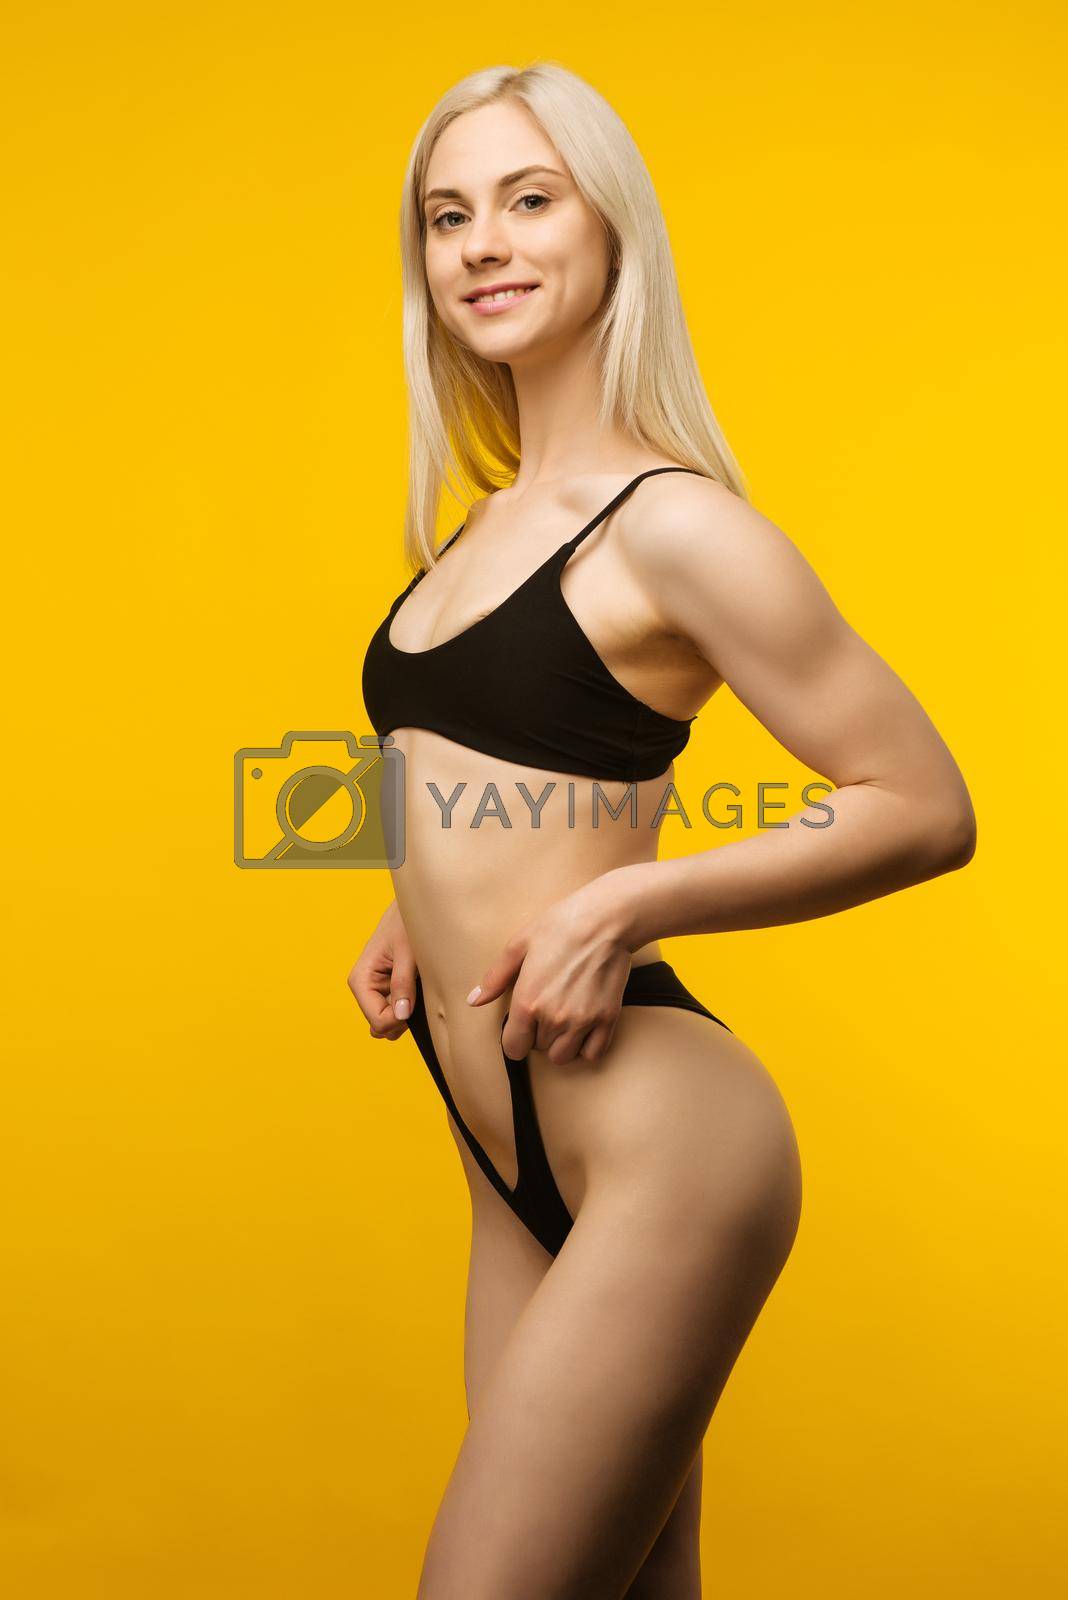 Royalty free image of Laughing sporty girl in black bikini posing on yellow background. by zartarn